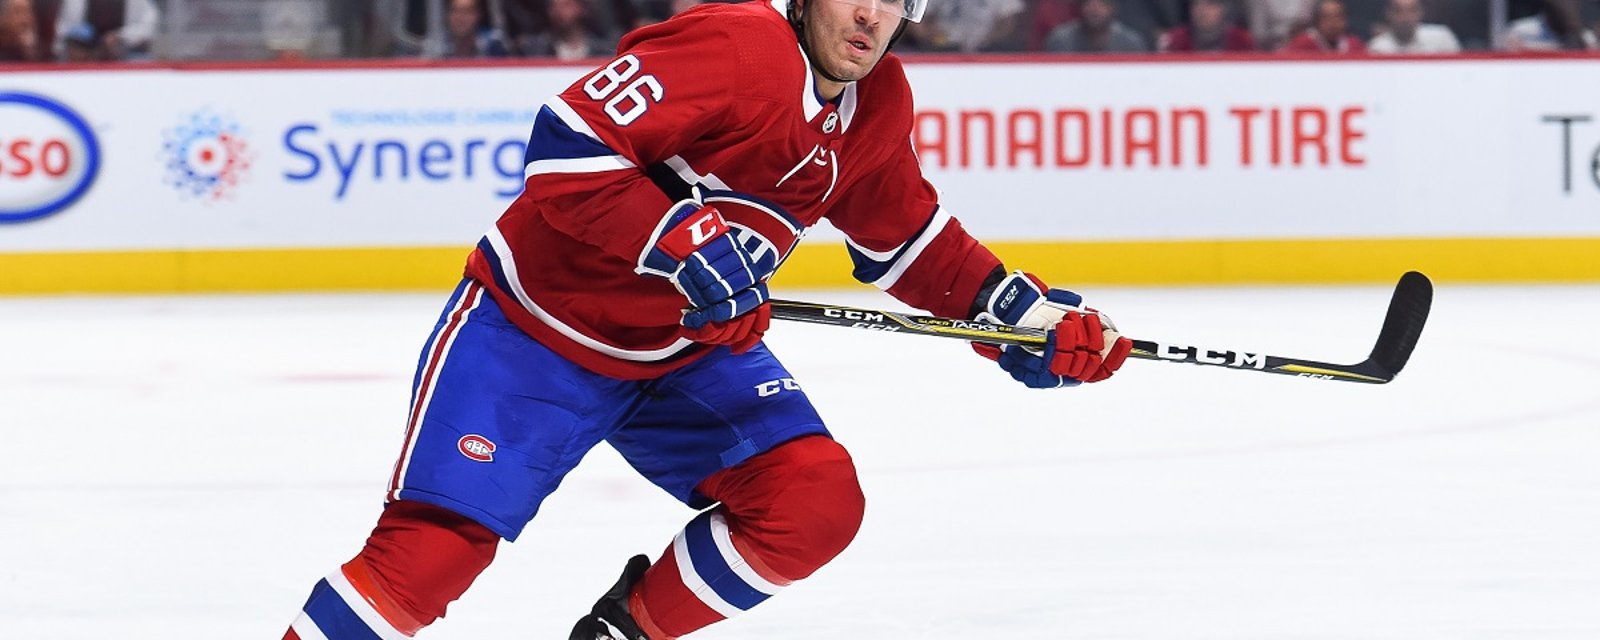 Habs prospect suffers major injury just days before training camp.